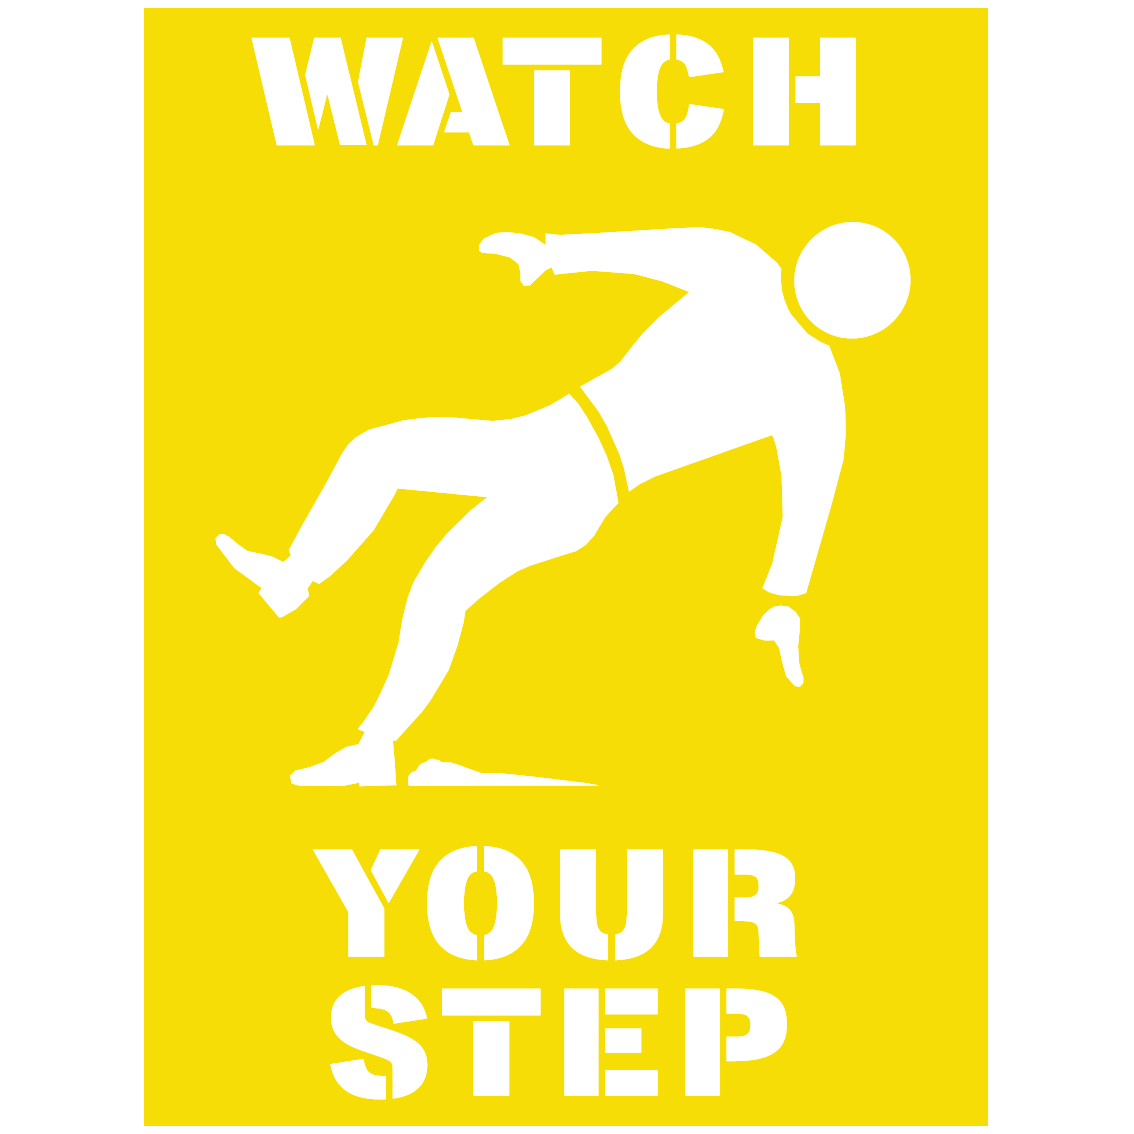 600x450mm – Poly Stencil – Watch Your Step